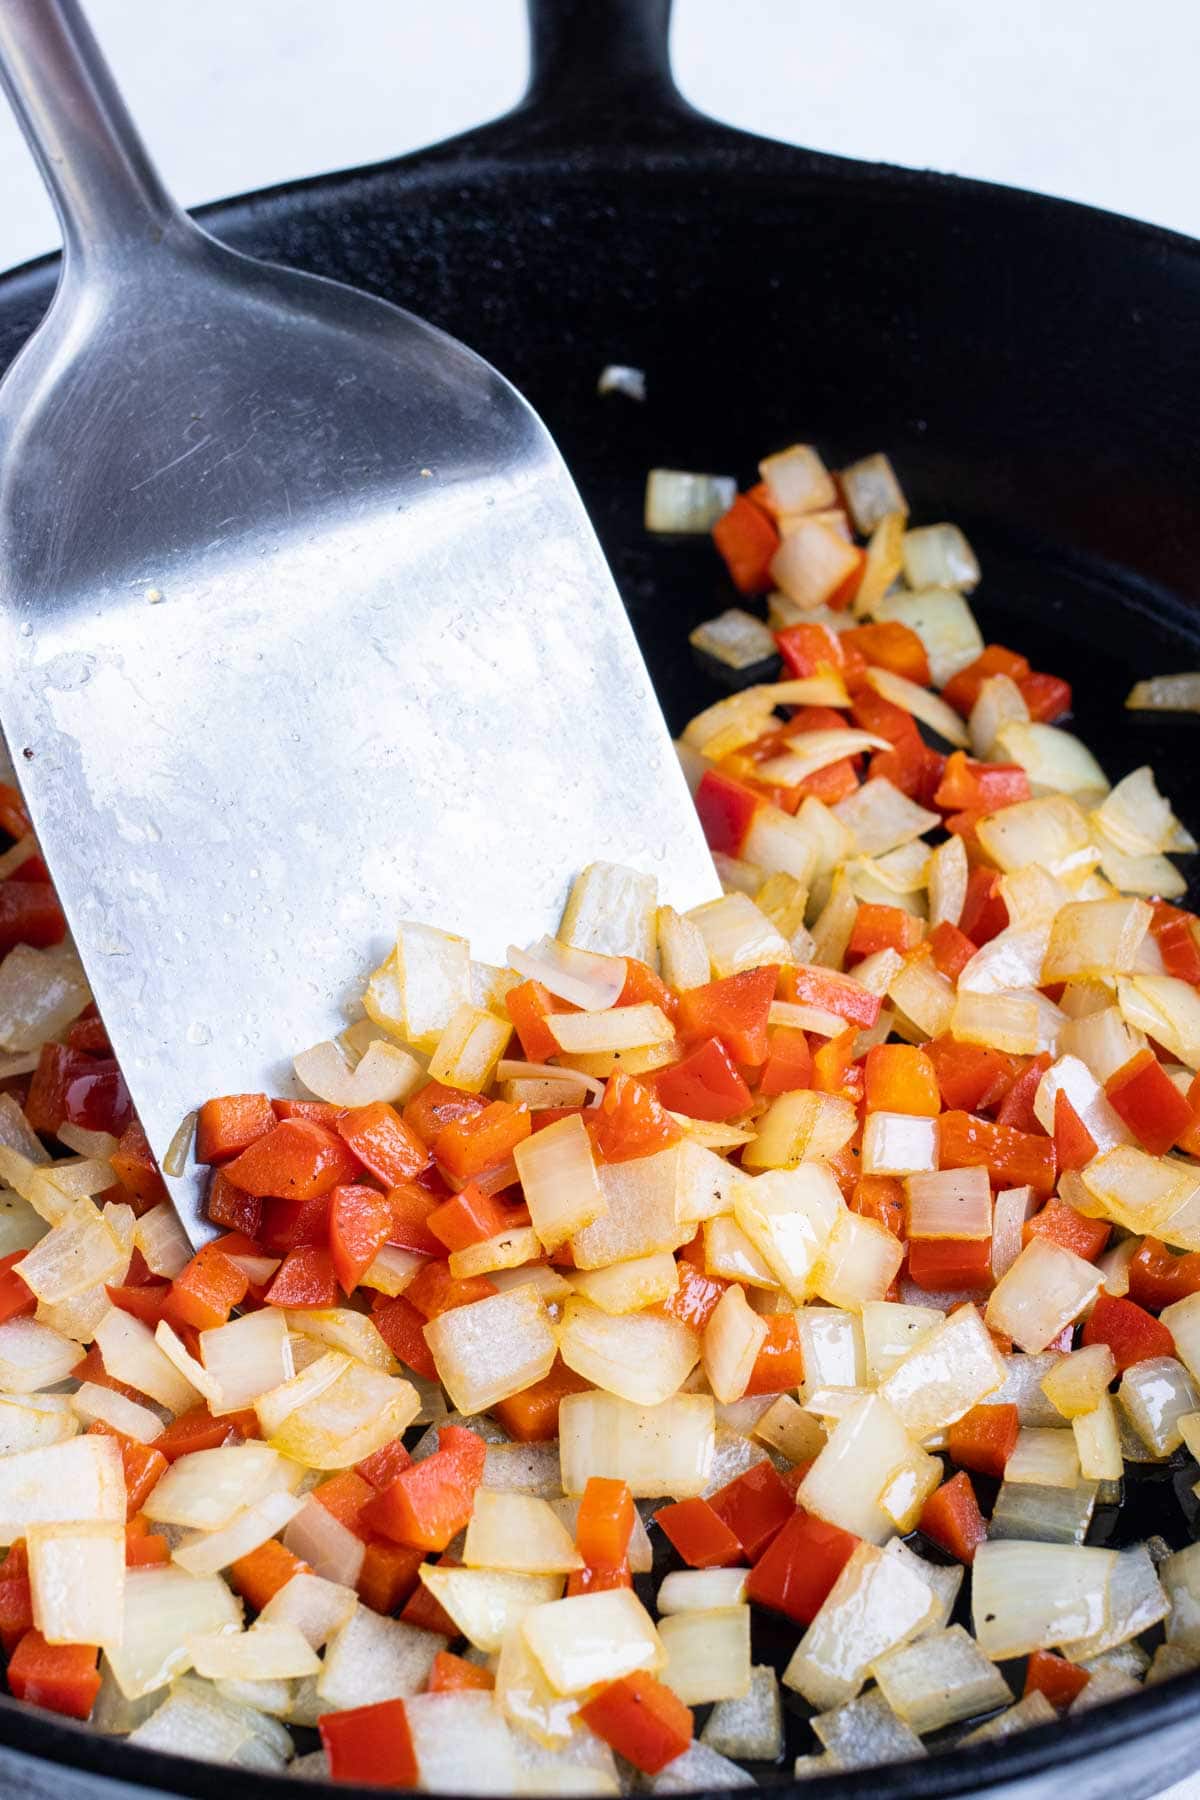 Bell peppers and onion are sautéed in the cast-iron skillet.